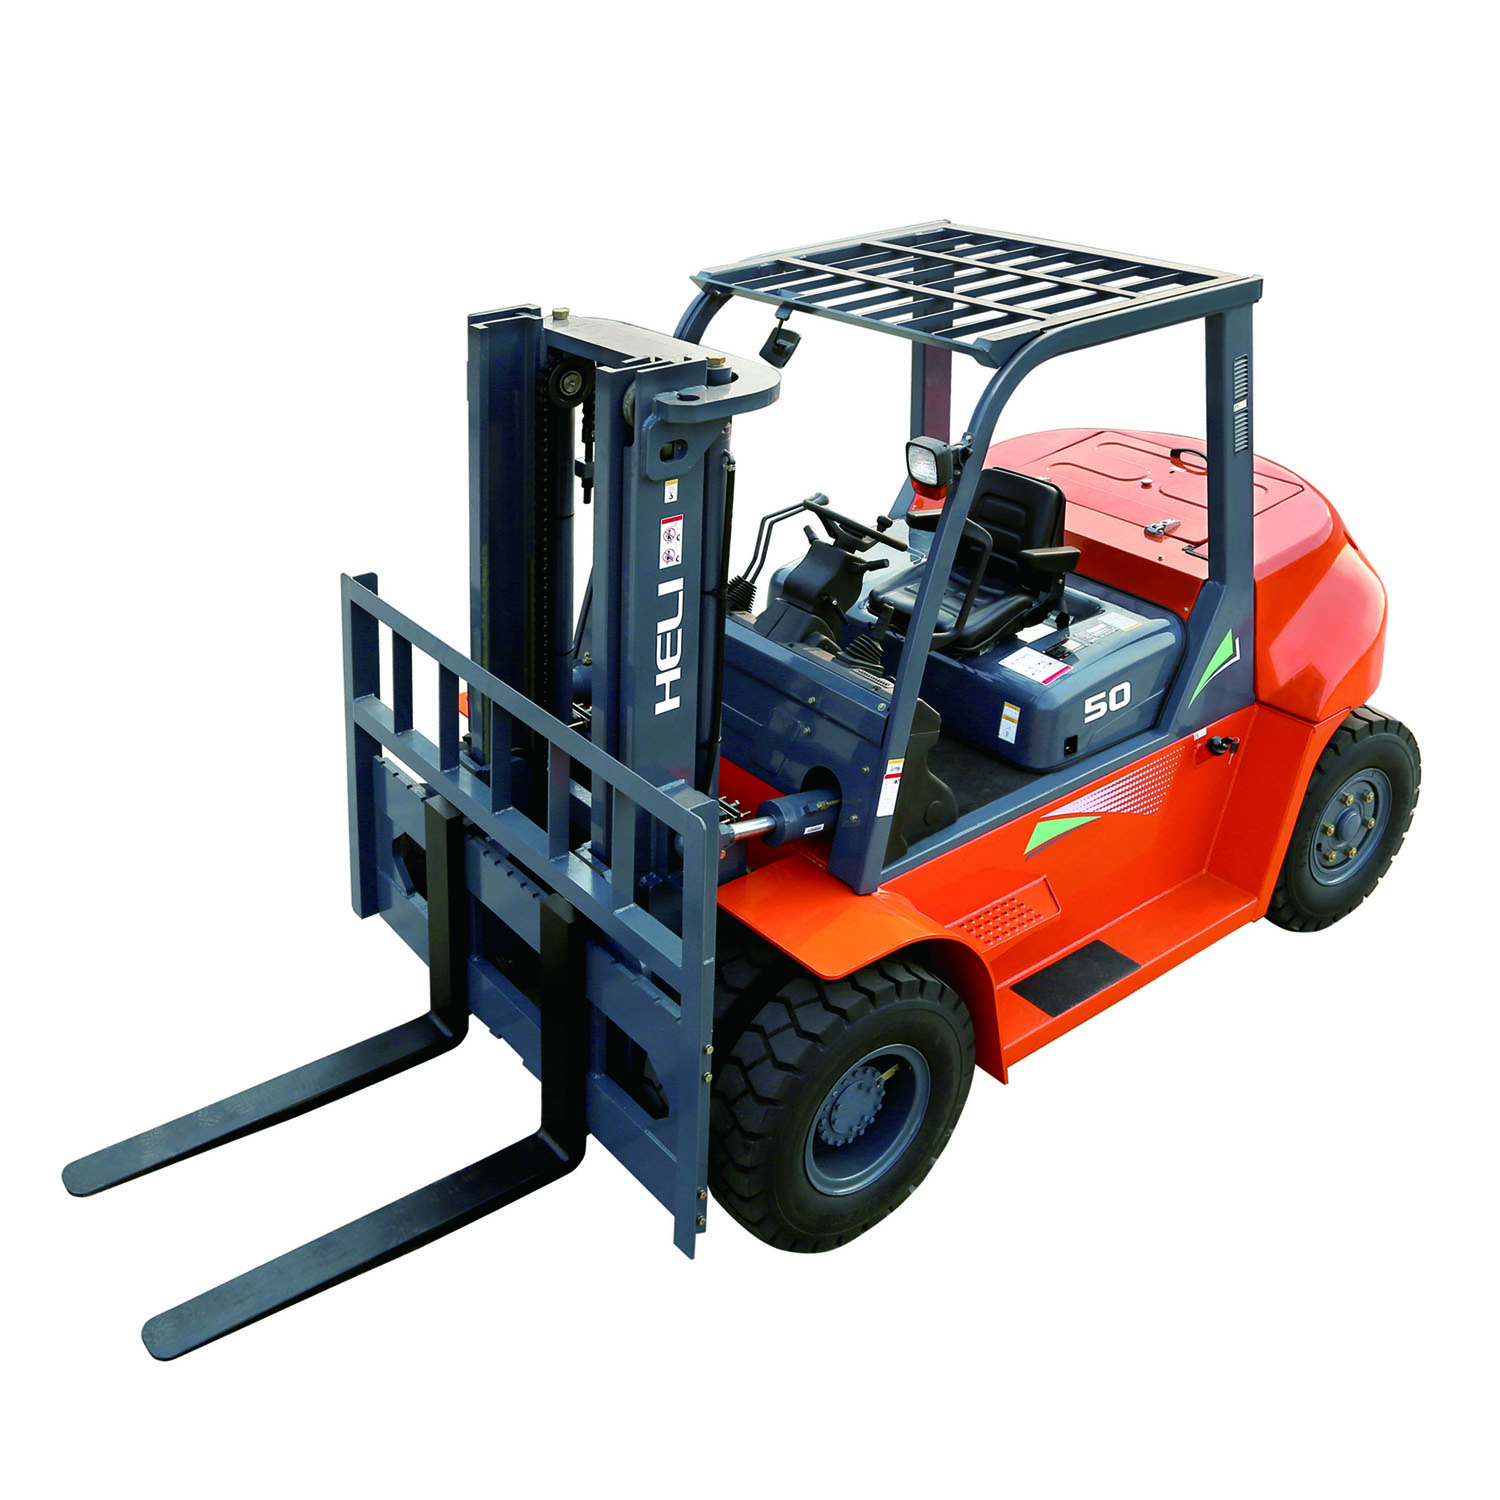 G-series-IC-5.0t-forklift-NO1-1